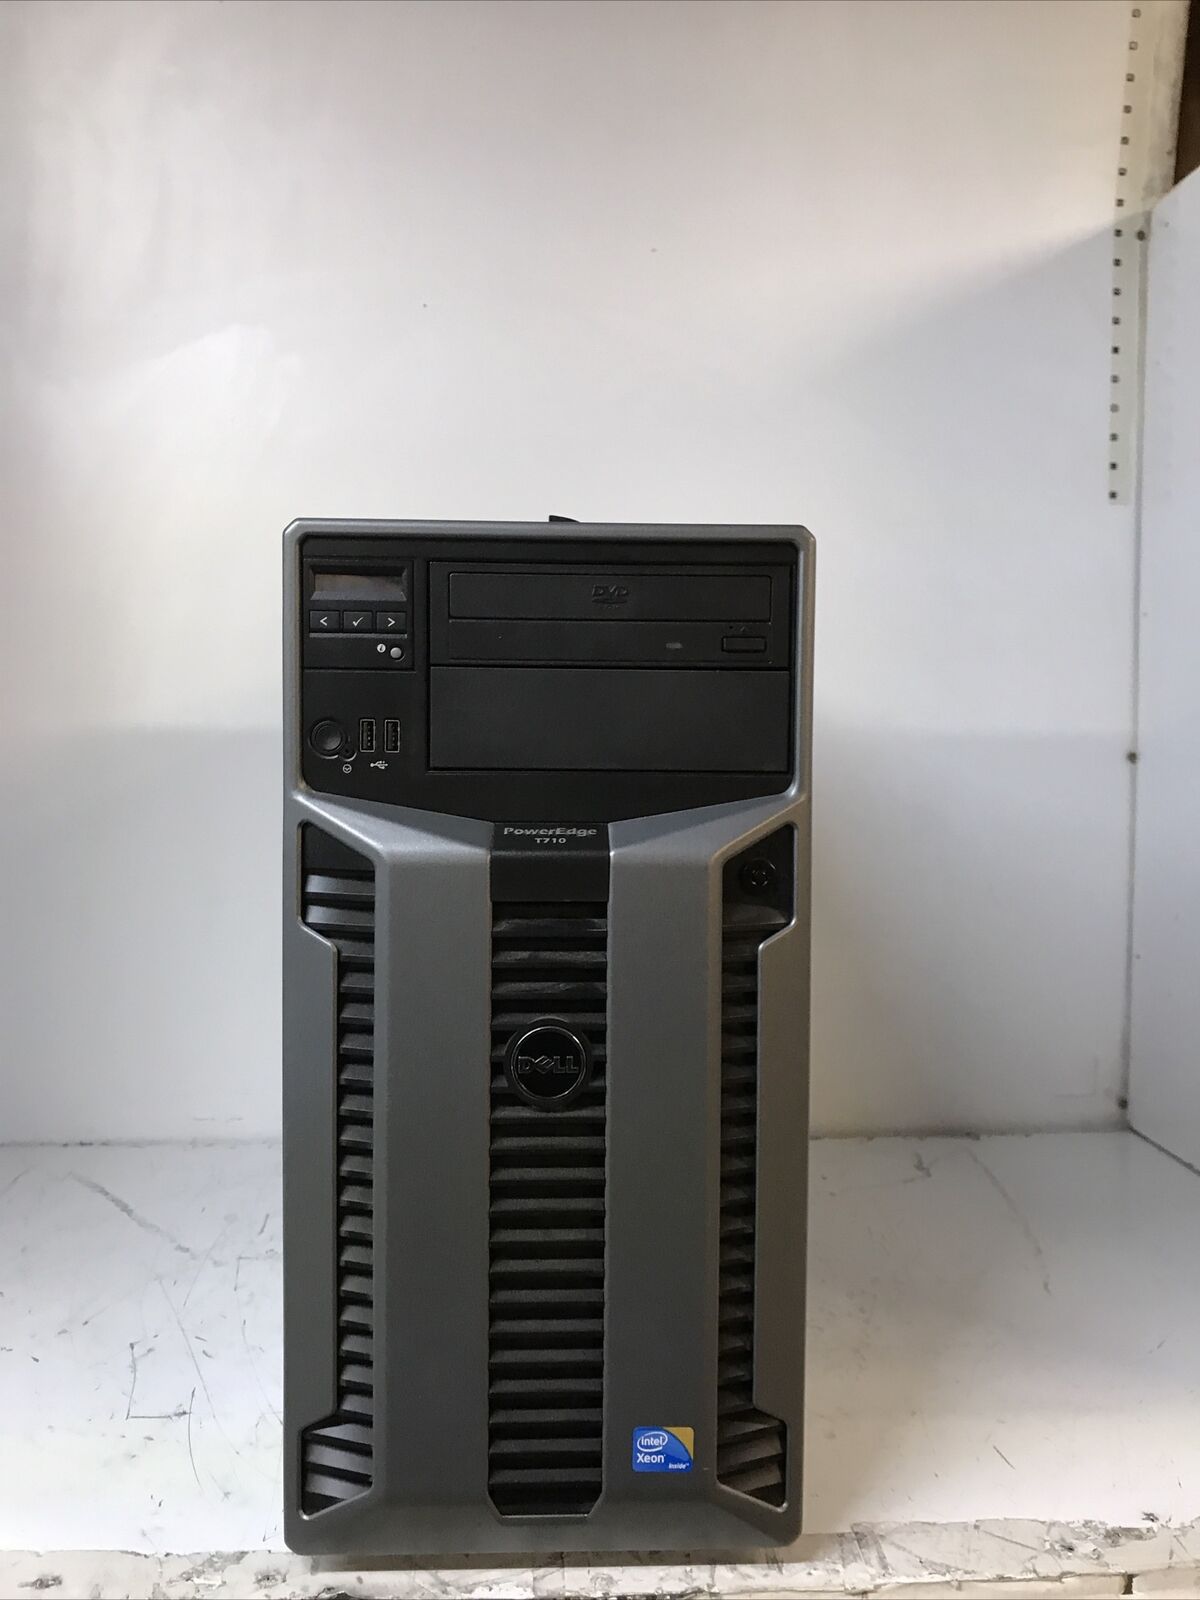 Dell PowerEdge T710 Server 2xXeon E5520 2.27 GHz 16GB RAM NO HDD Boot to BIOS